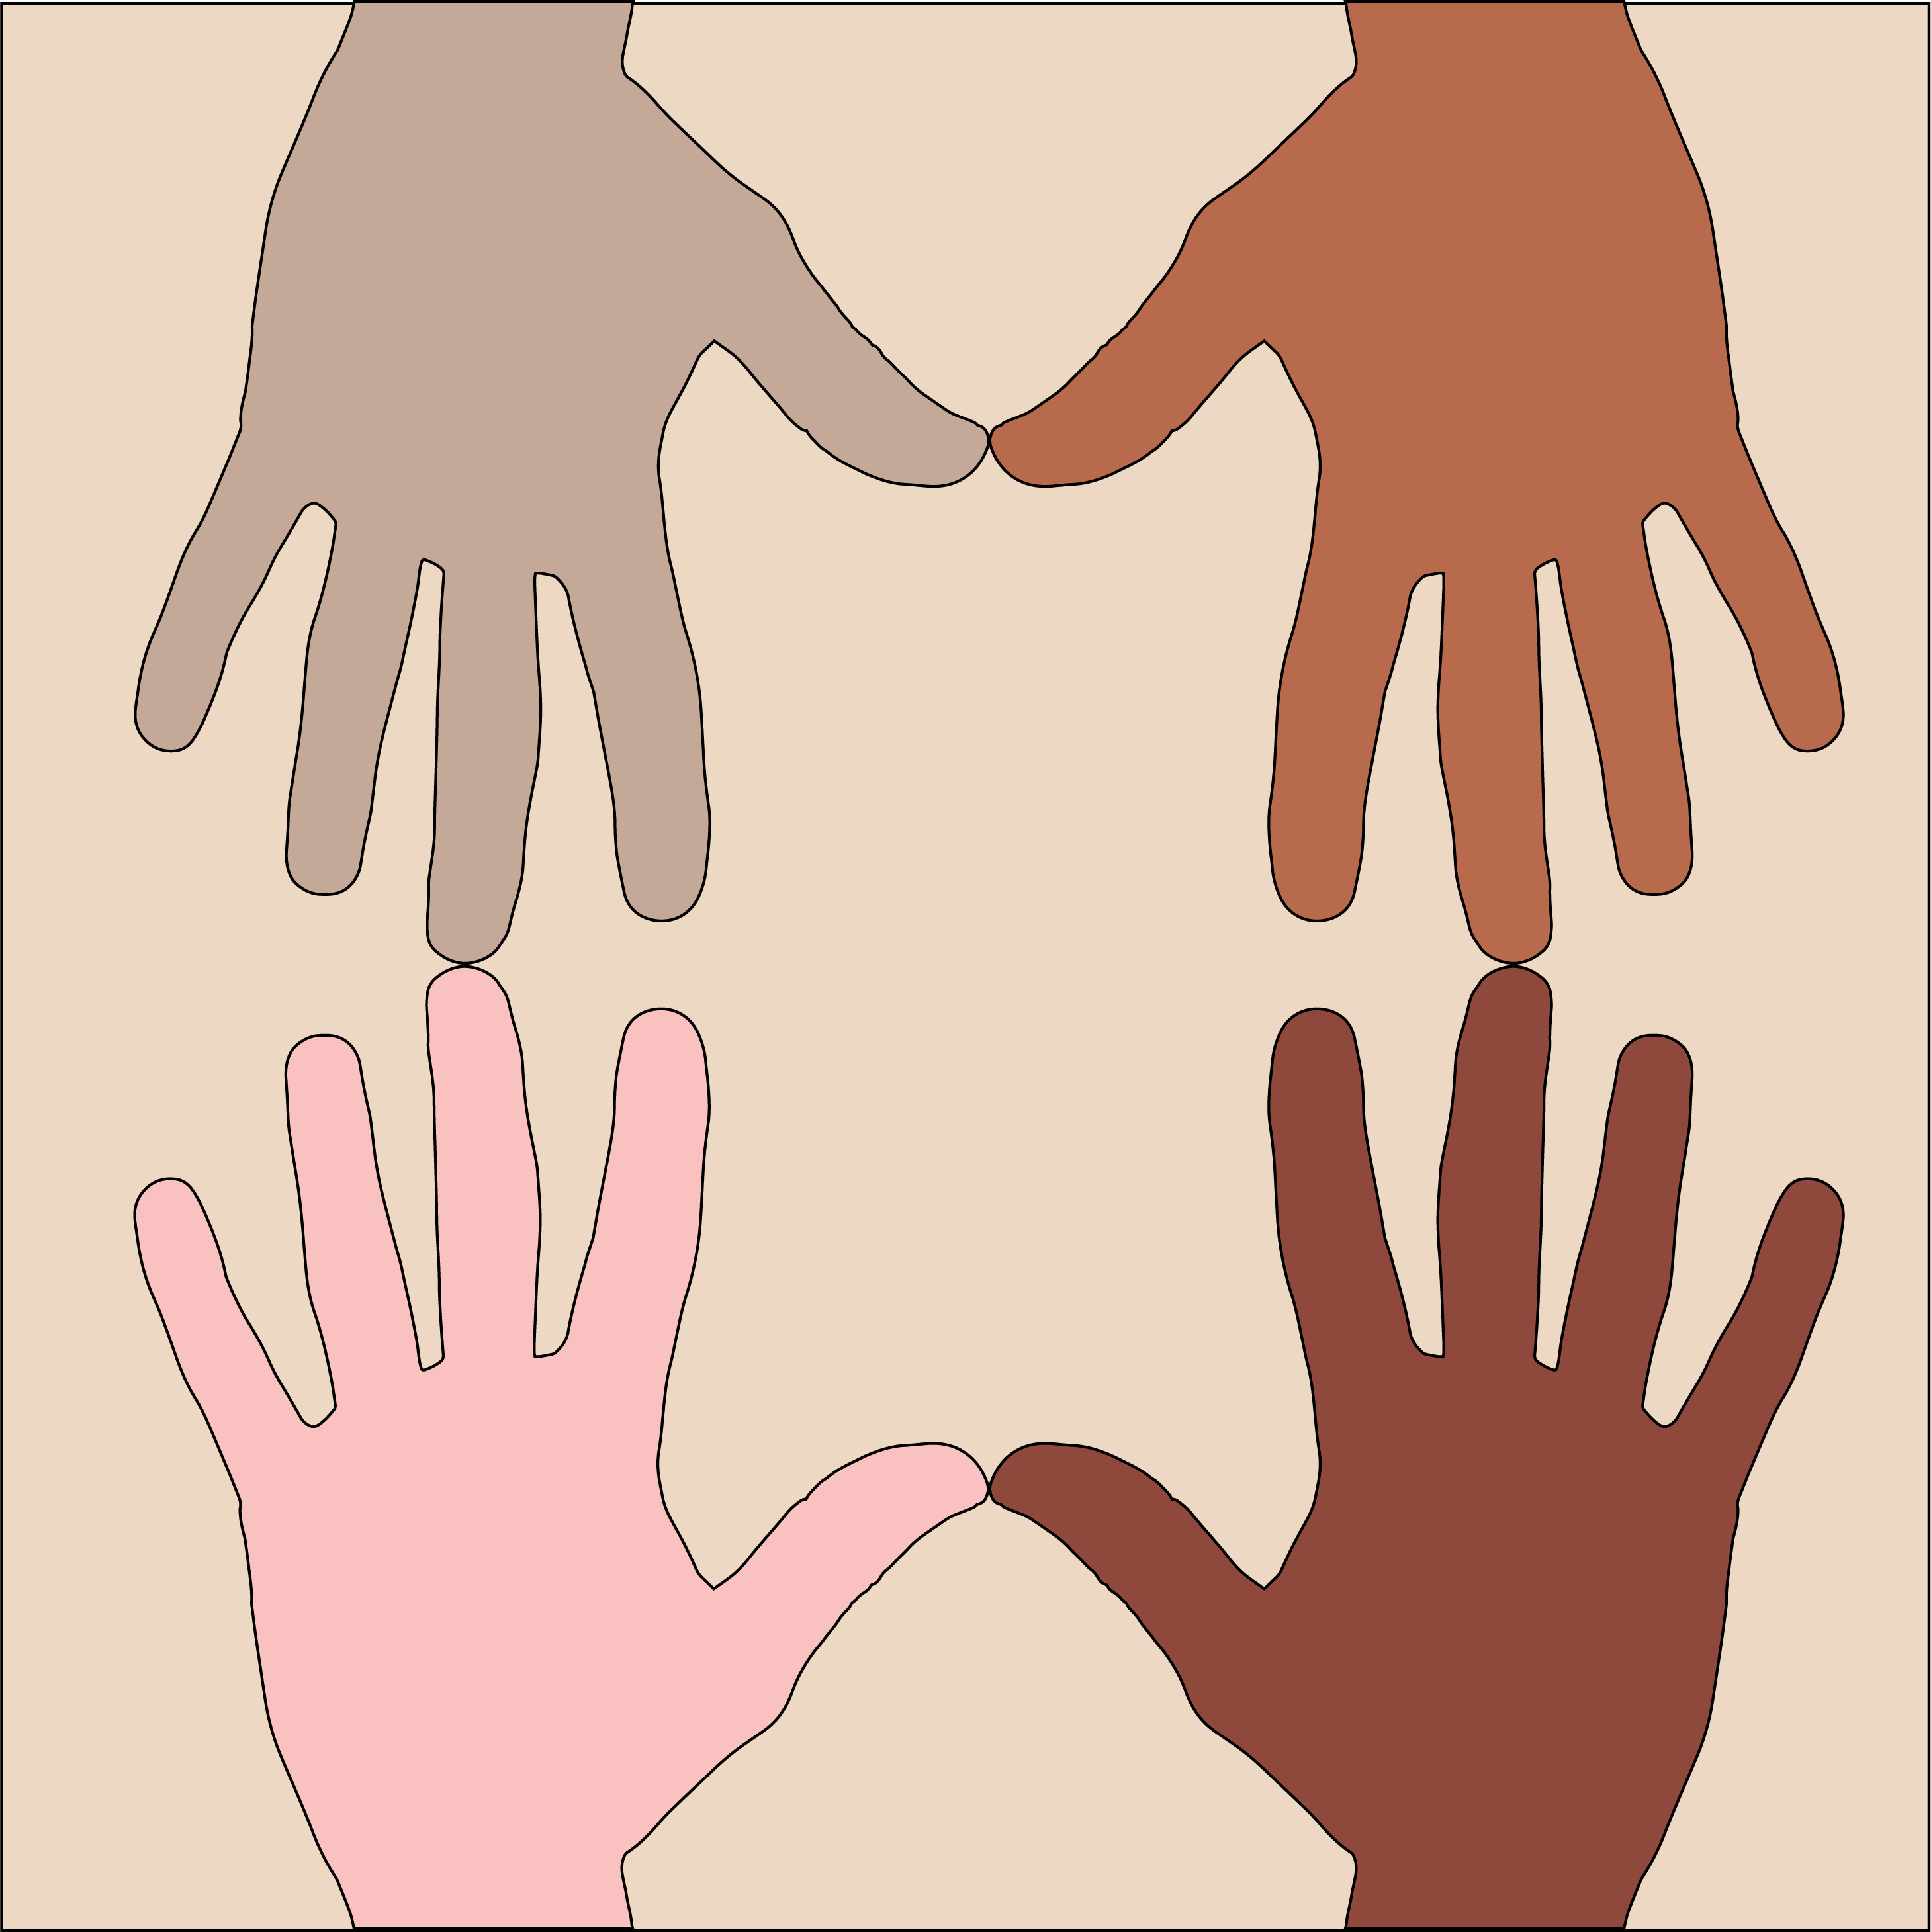 Multiple hands of different colors meant to represent racial diversity.